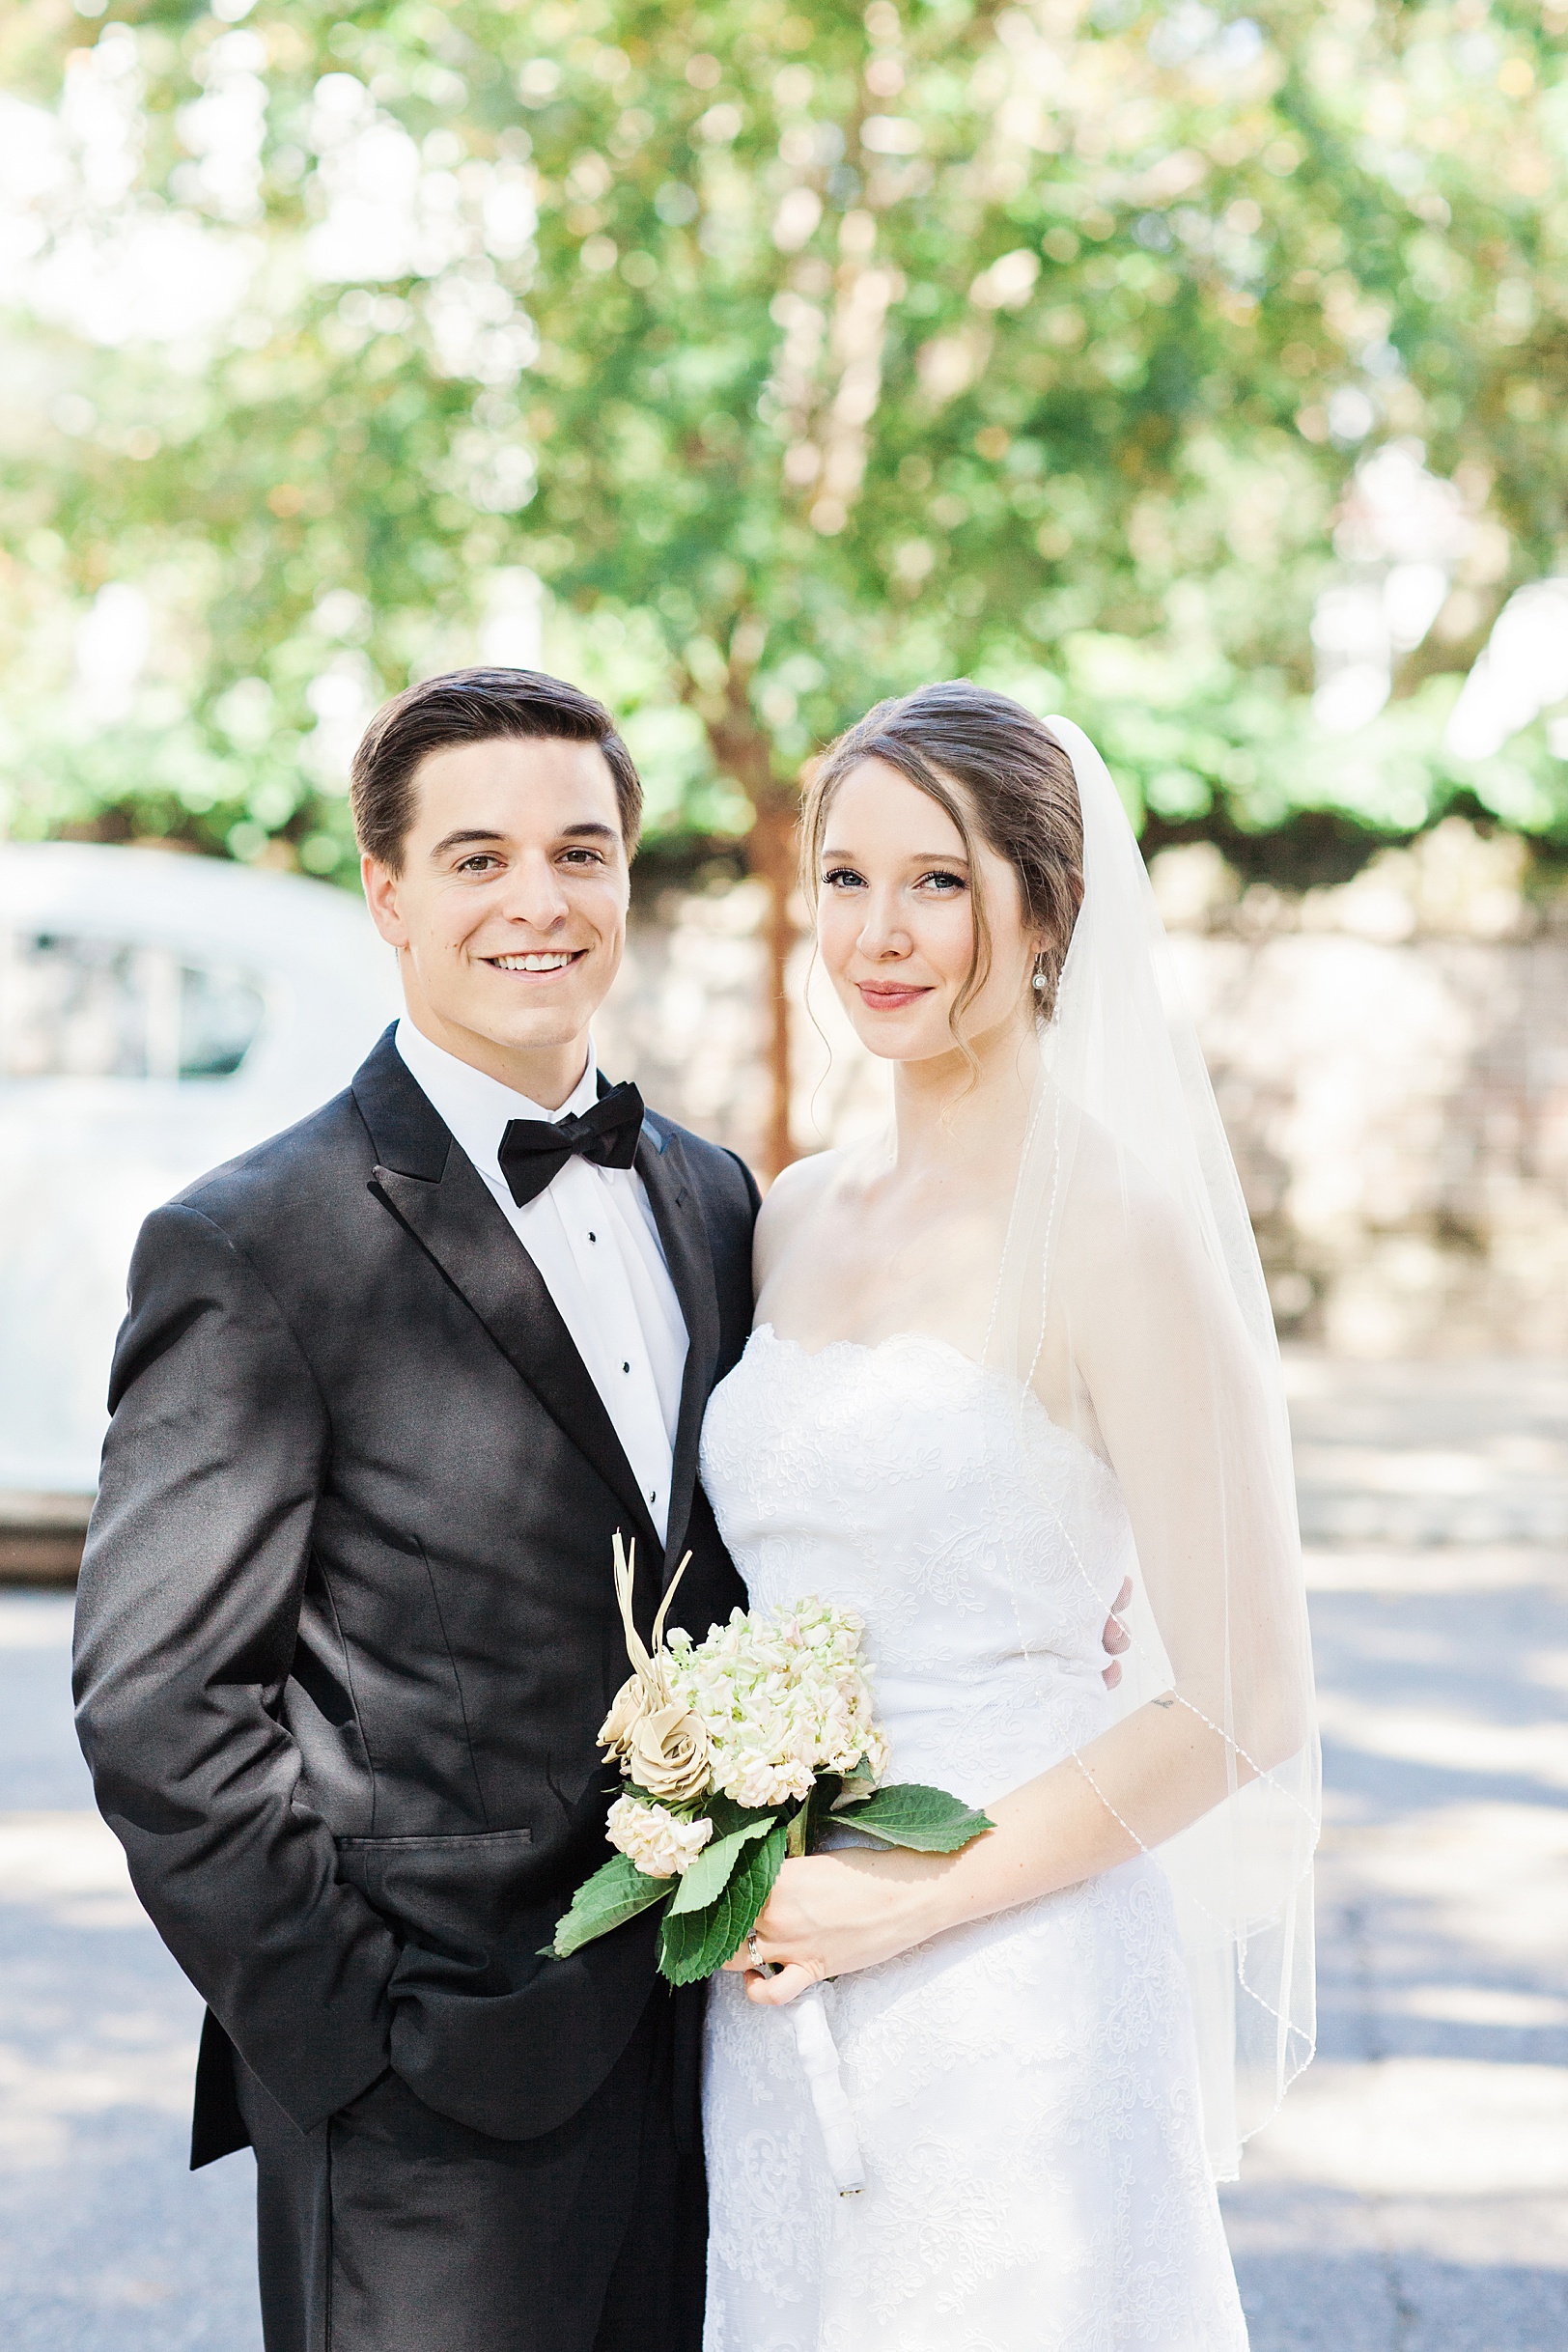 Bride and Groom smiling portrait | Kaitlin Scott Photography